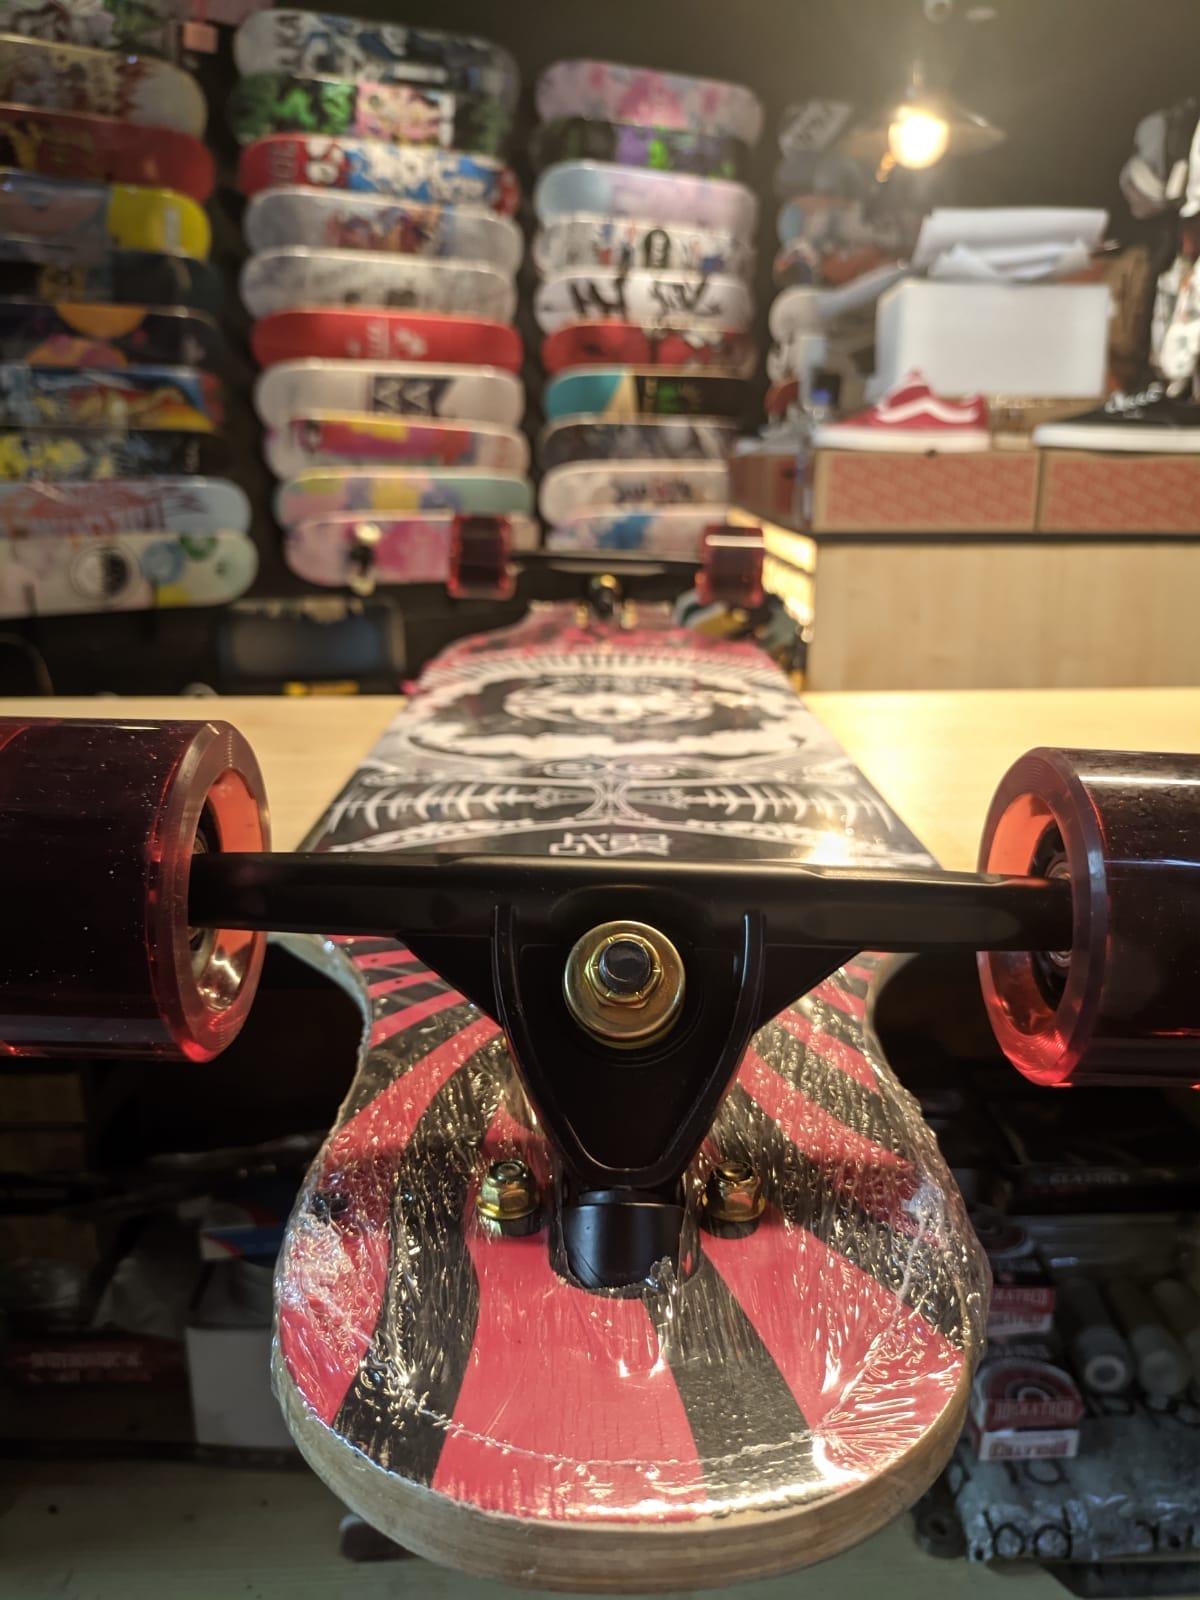 Can I use my longboard for tricks and stunts, or is it only for cruising?